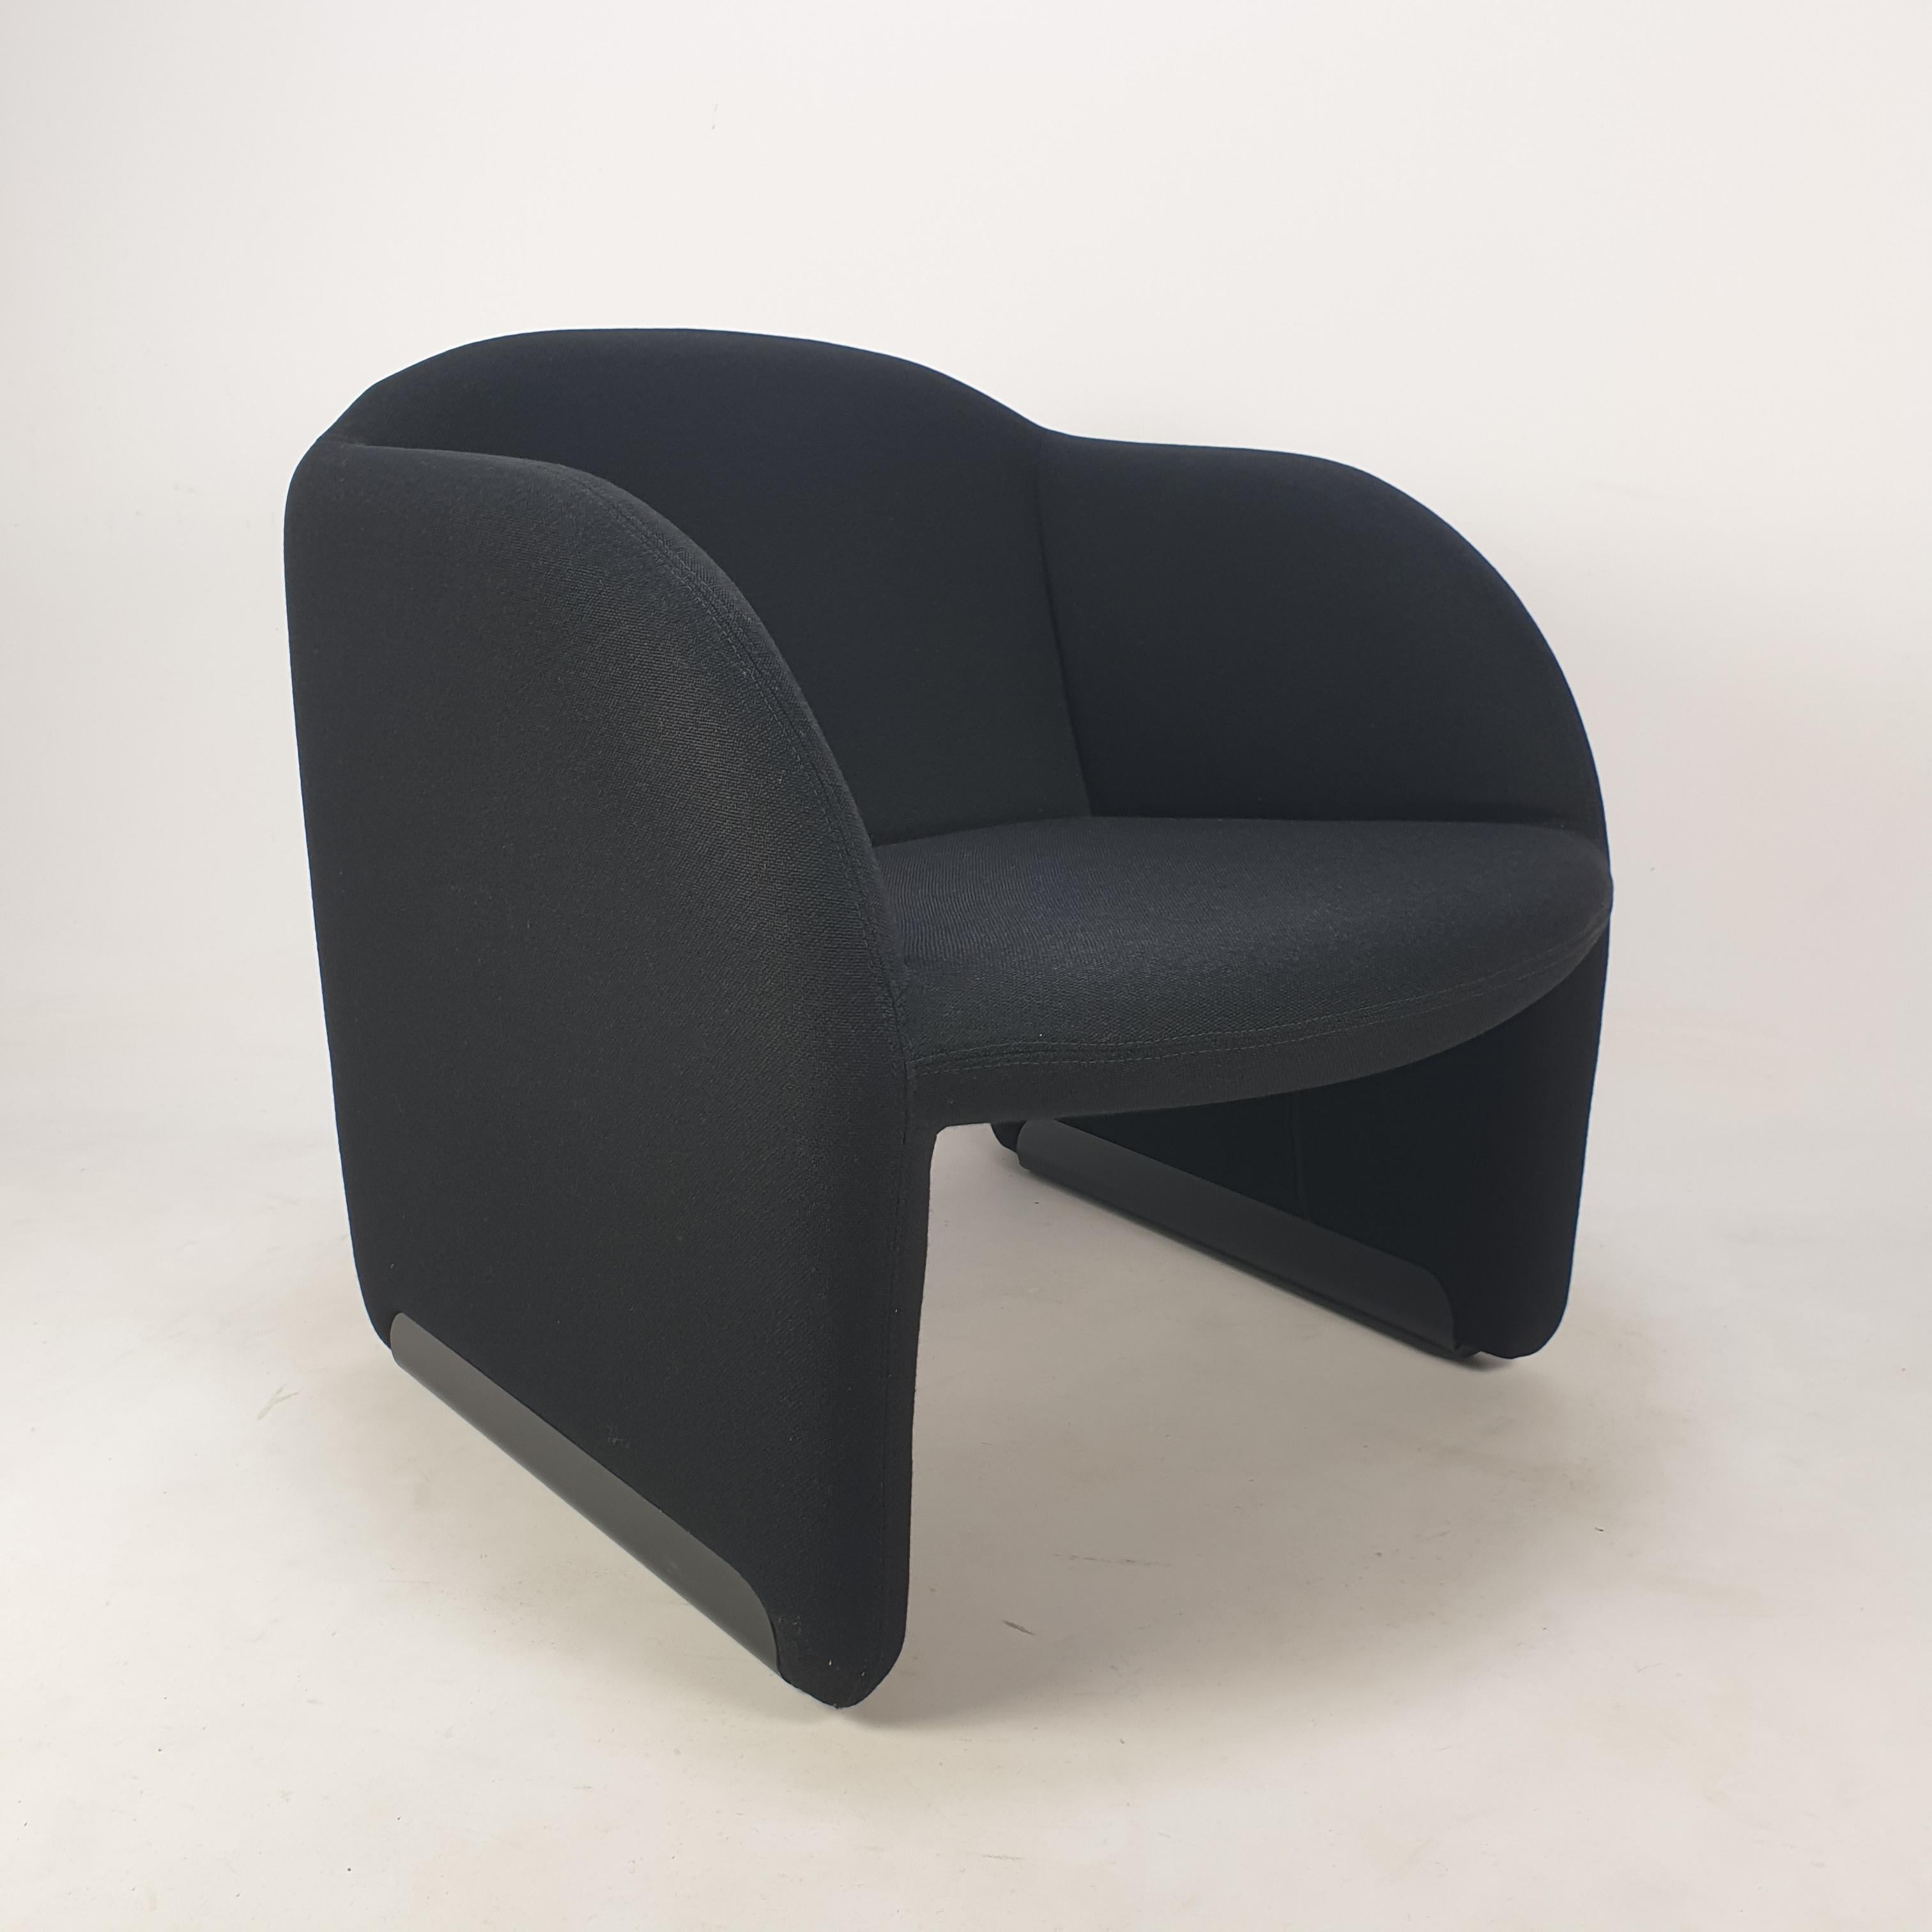 Very comfortable Artifort Ben chair. The famous Pierre Paulin designed it in the 80's and named it after a Artifort colleague. Covered with high quality wool fabric, Kvadrat Tonus (color number 0690). This is the original fabric and it is in very